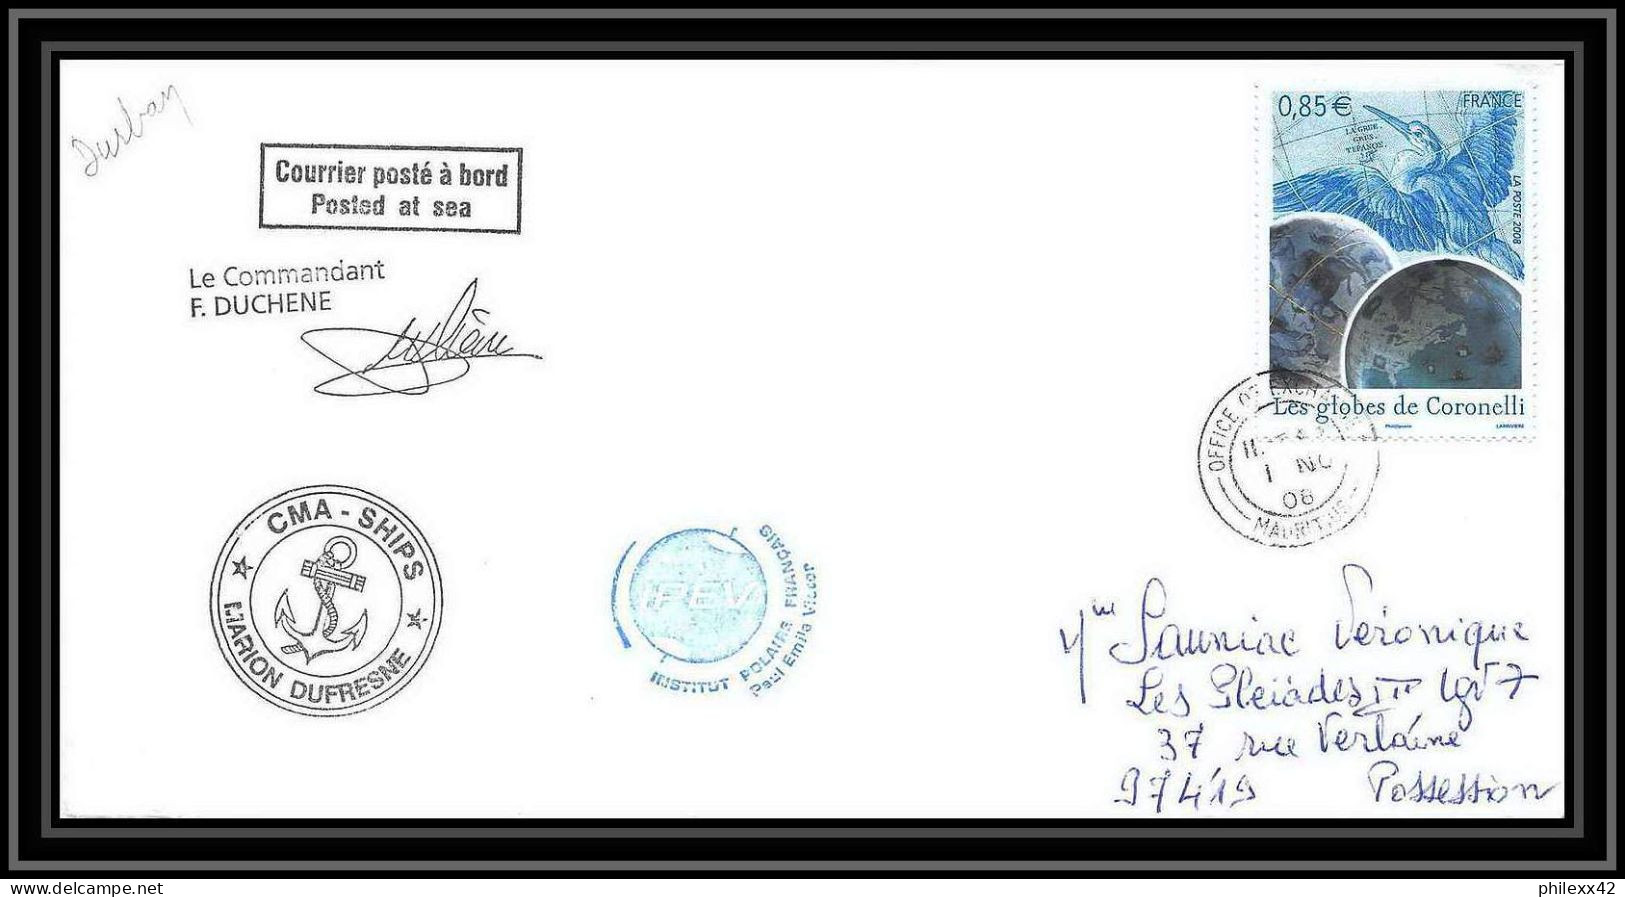 2840 ANTARCTIC Terres Australes TAAF Lettre Cover Dufresne 2 Signé Signed Op 2008/3 Durban 1/11/2008 - Antarktis-Expeditionen